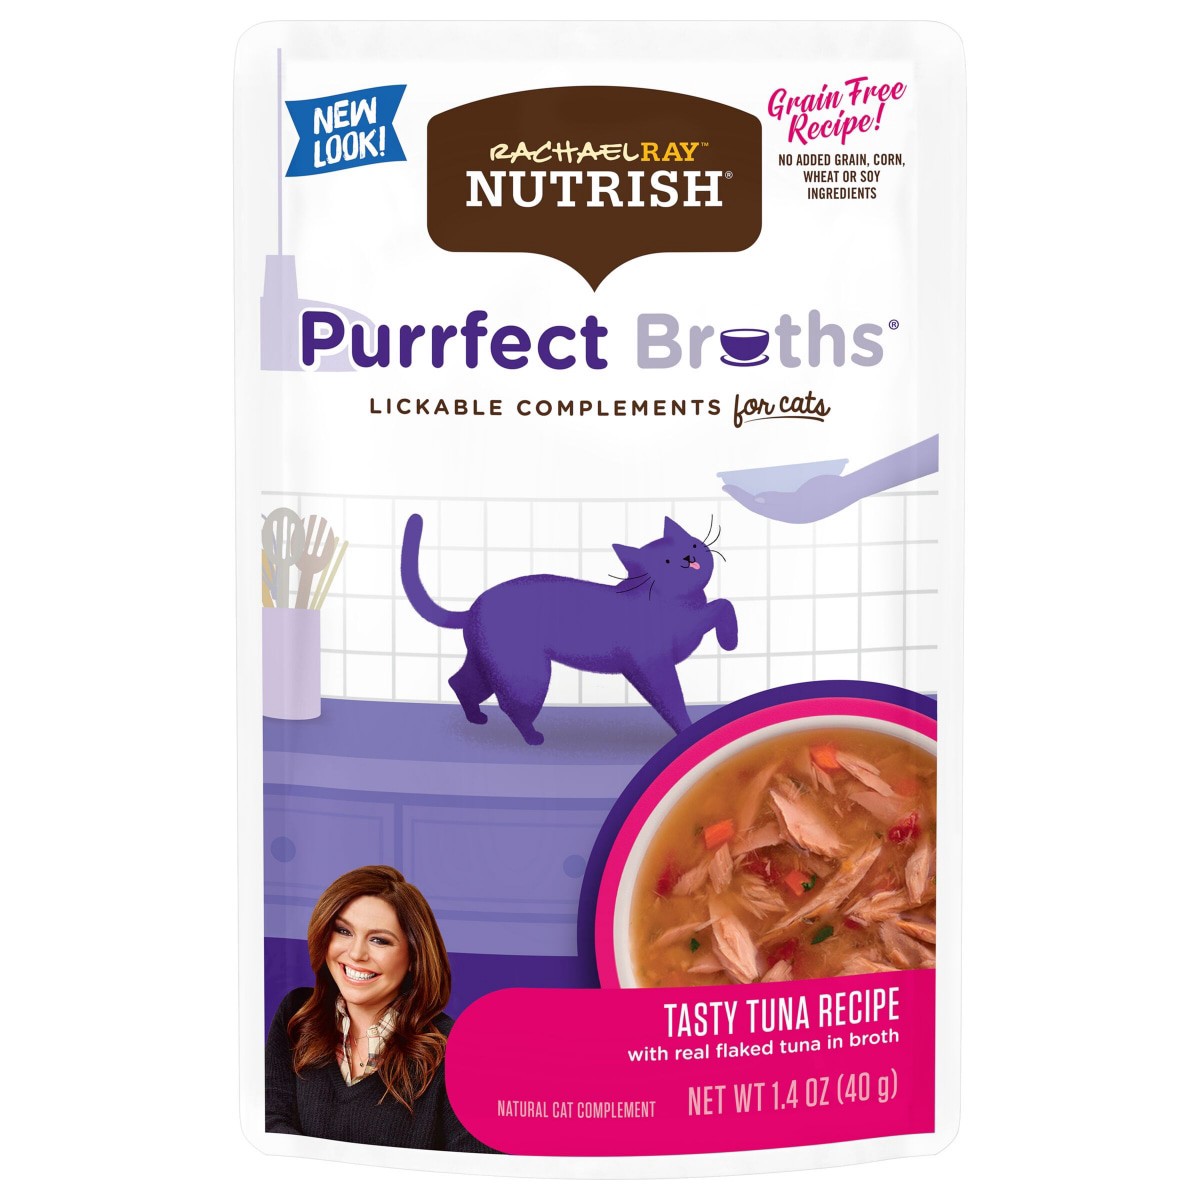 slide 6 of 17, Rachael Ray Nutrish Purrfect Broths All Natural Complement, Grain Free Tasty Tuna Recipe, 1.4 oz